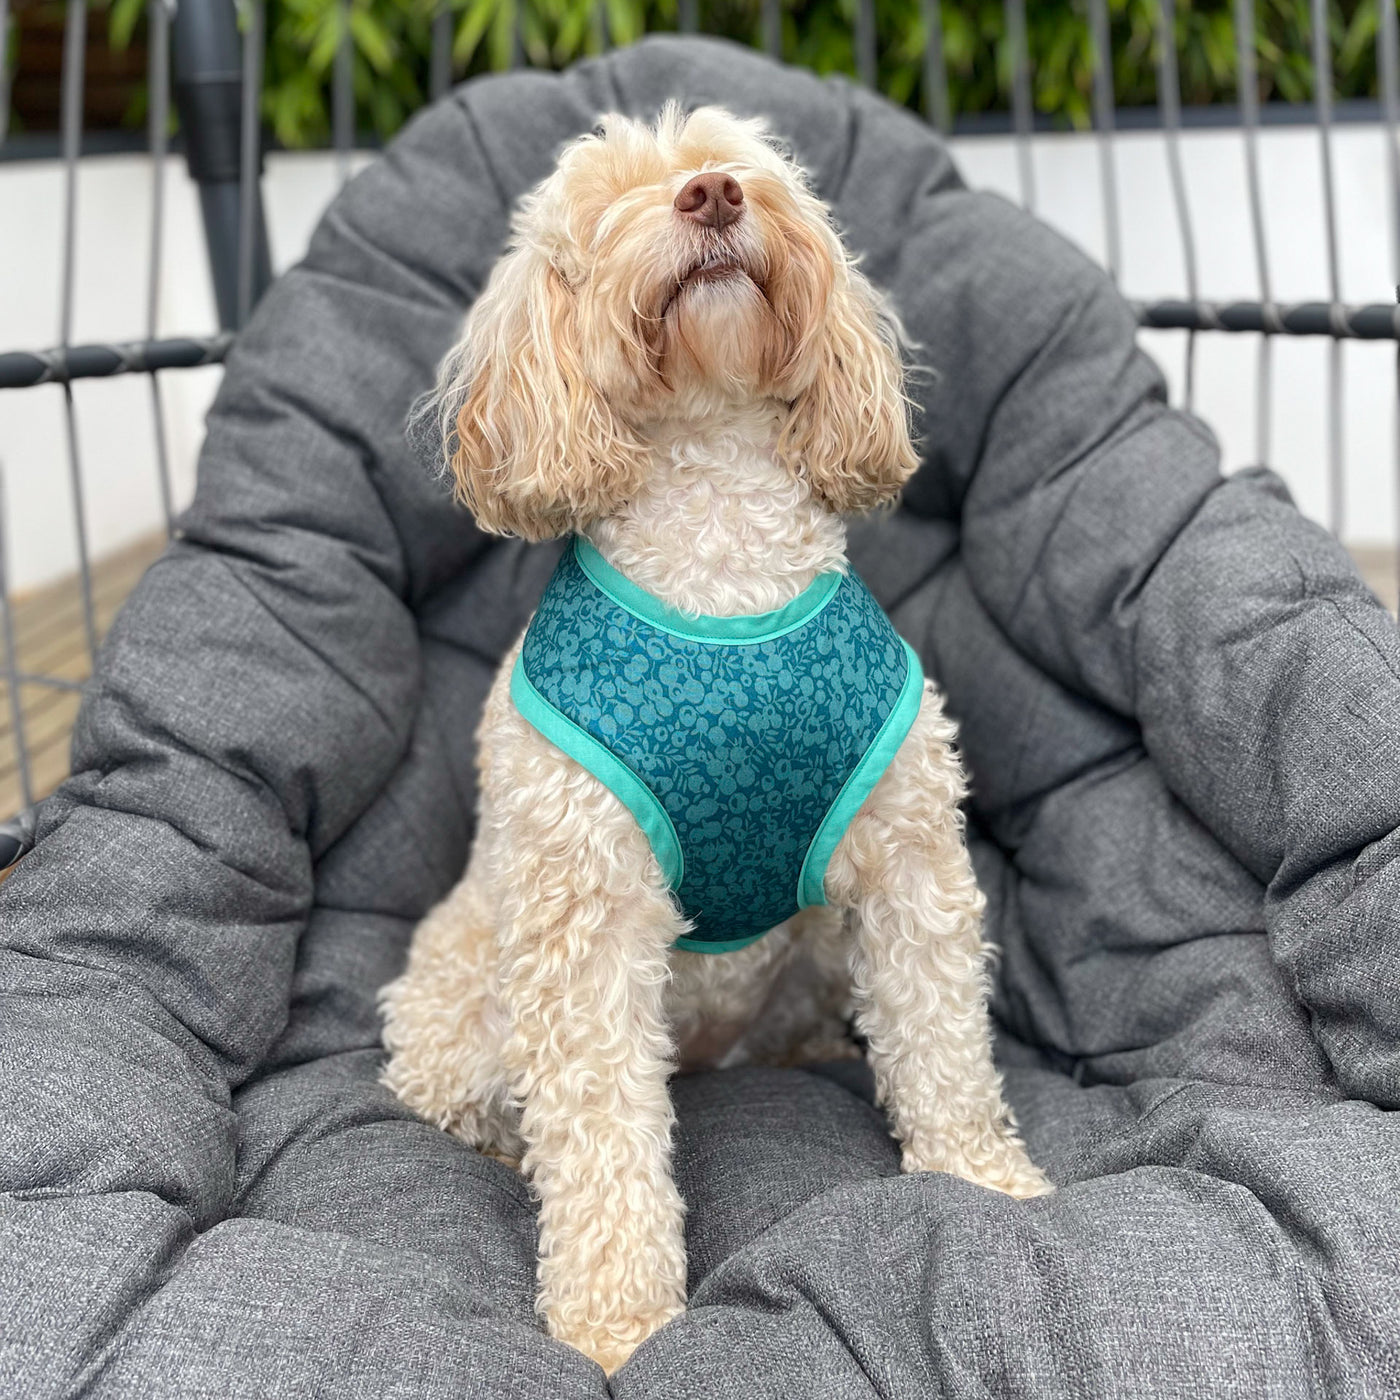 Mabel the cockapoo proudly wears a Liberty Autumn Emerald Soft Harness